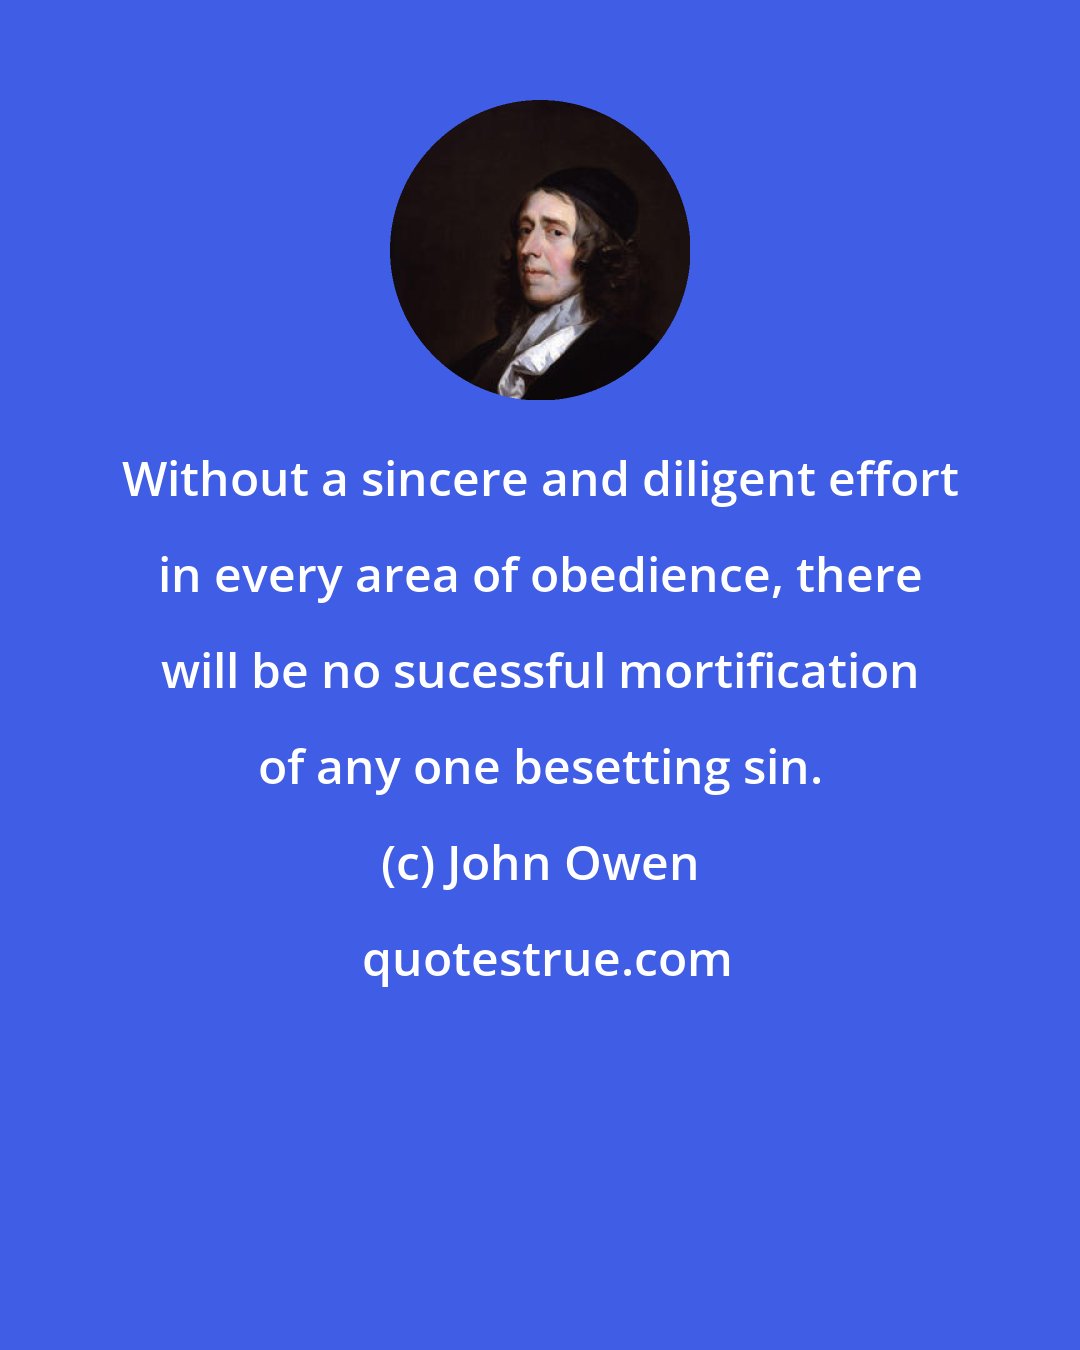 John Owen: Without a sincere and diligent effort in every area of obedience, there will be no sucessful mortification of any one besetting sin.